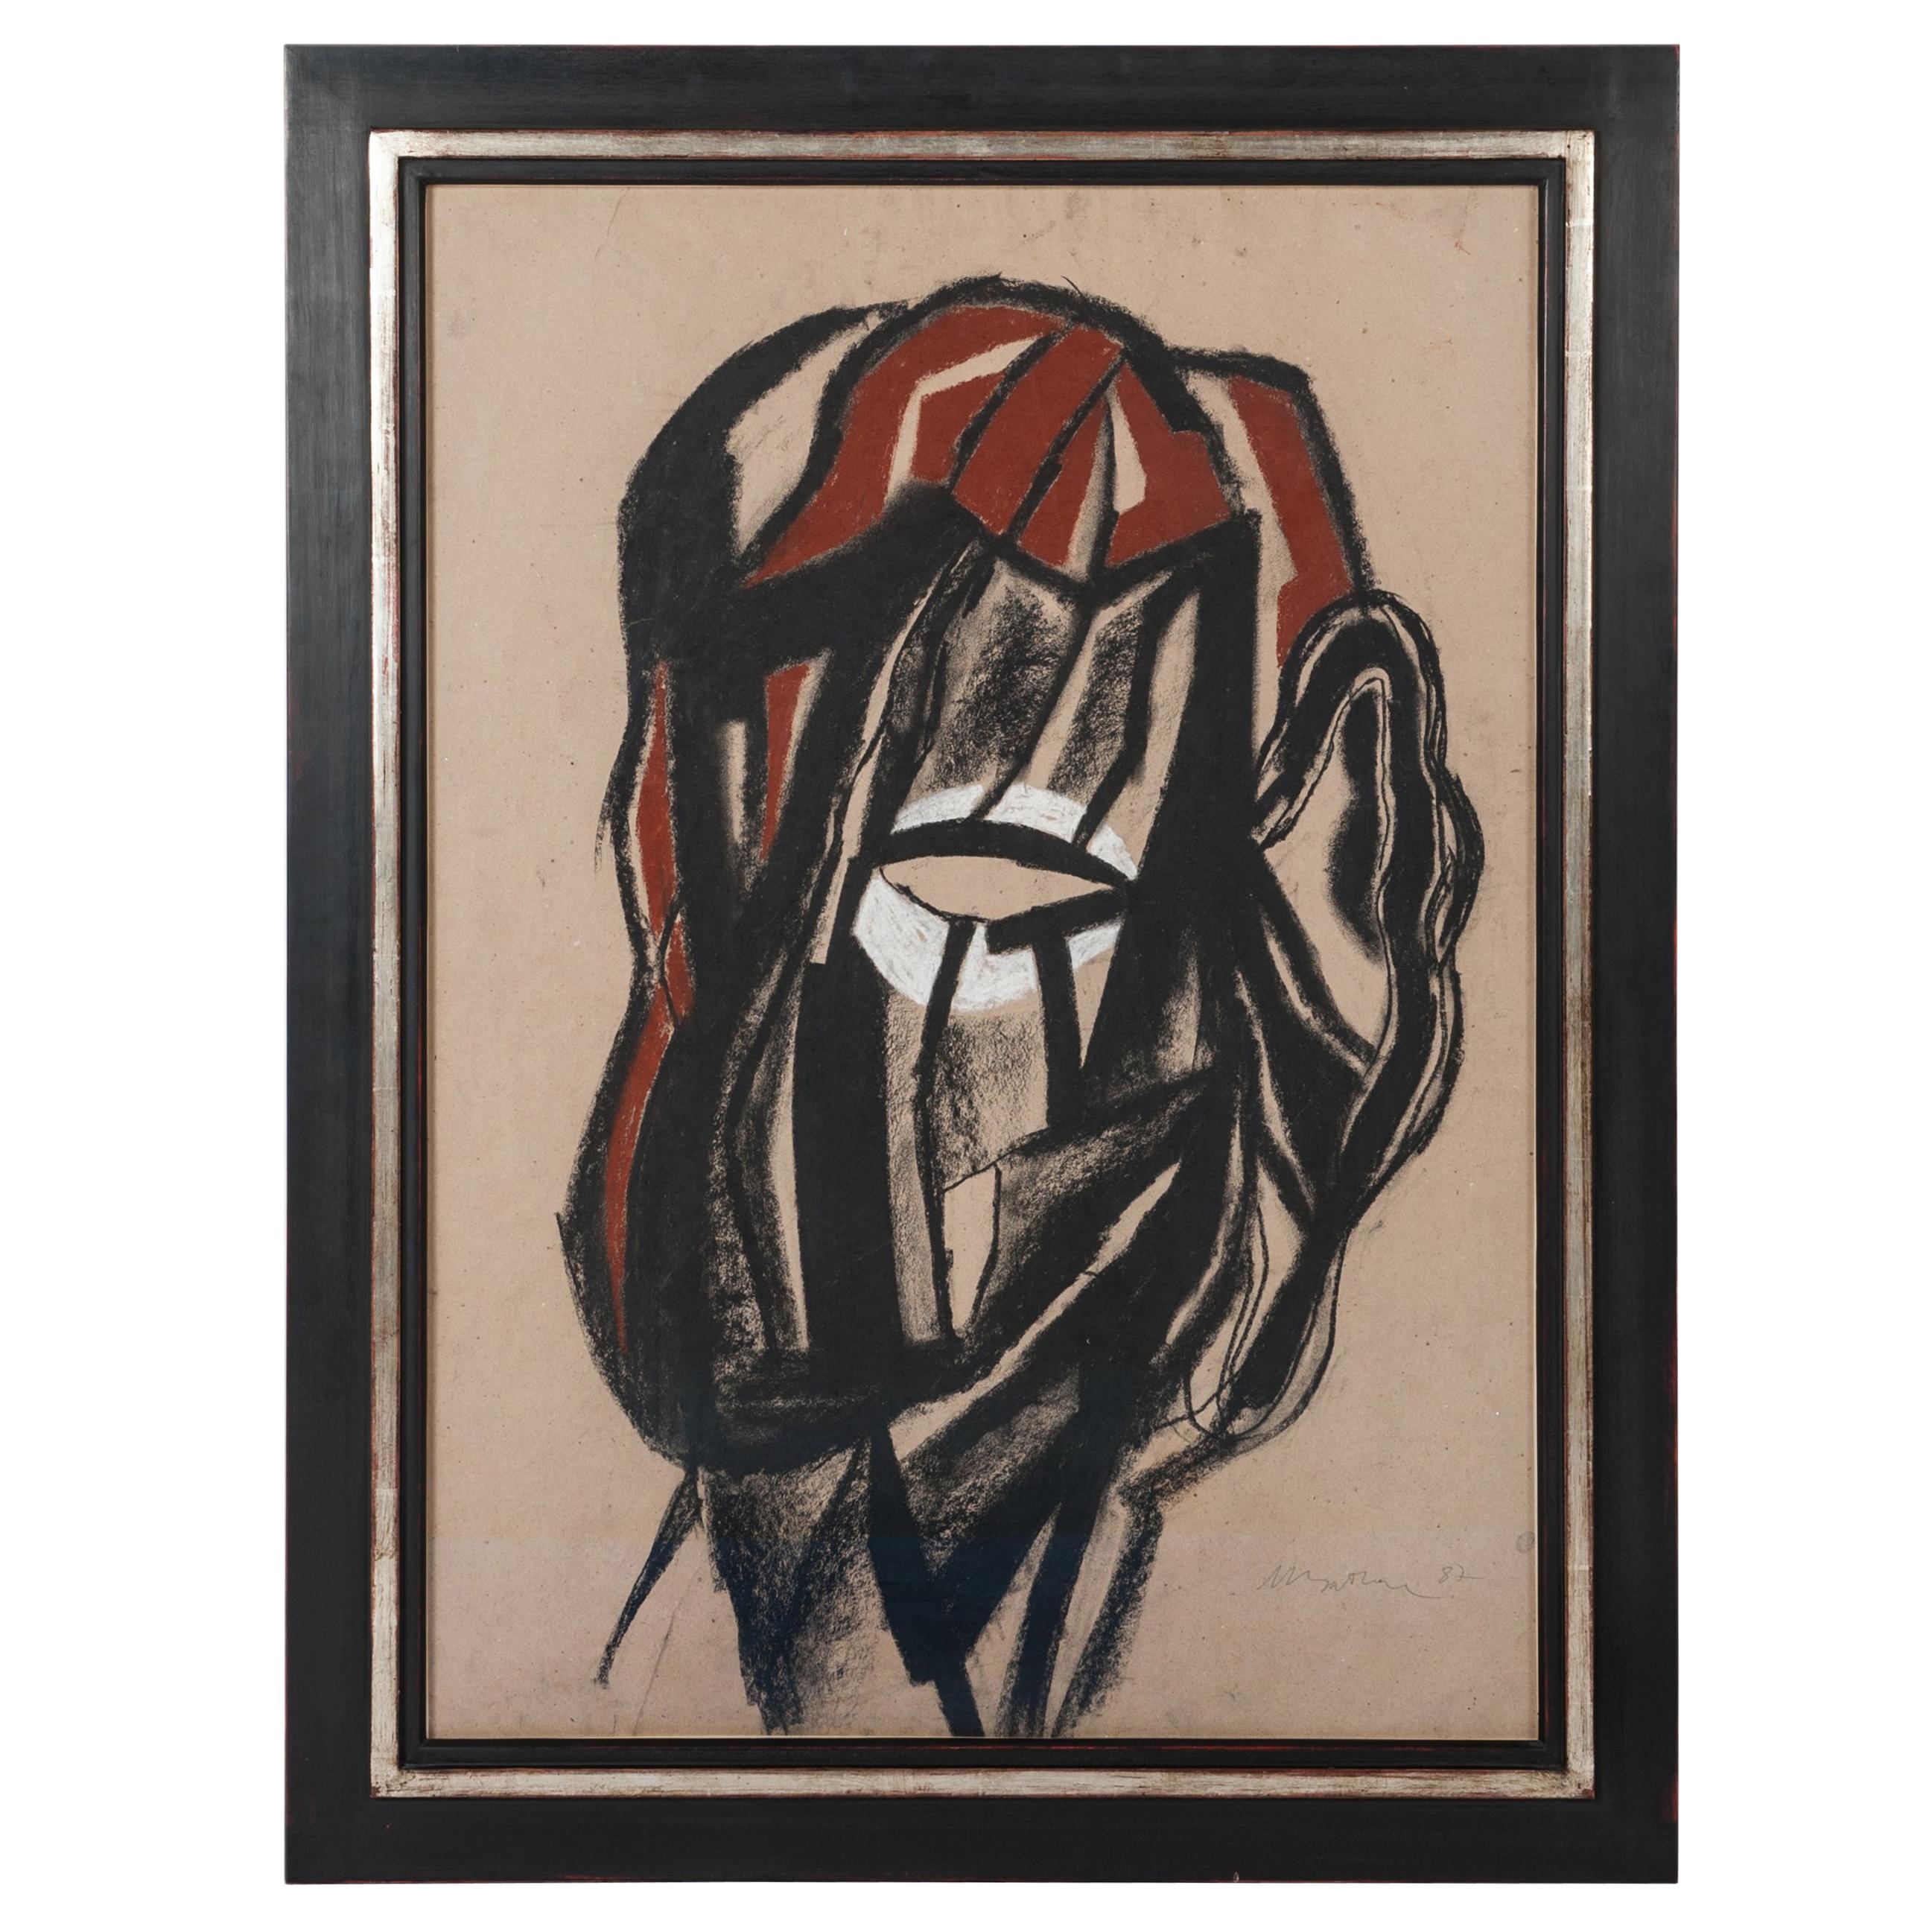 Charcoal Drawing Black, Beige, Red and White Michel Batlle 1987 Handworked Frame